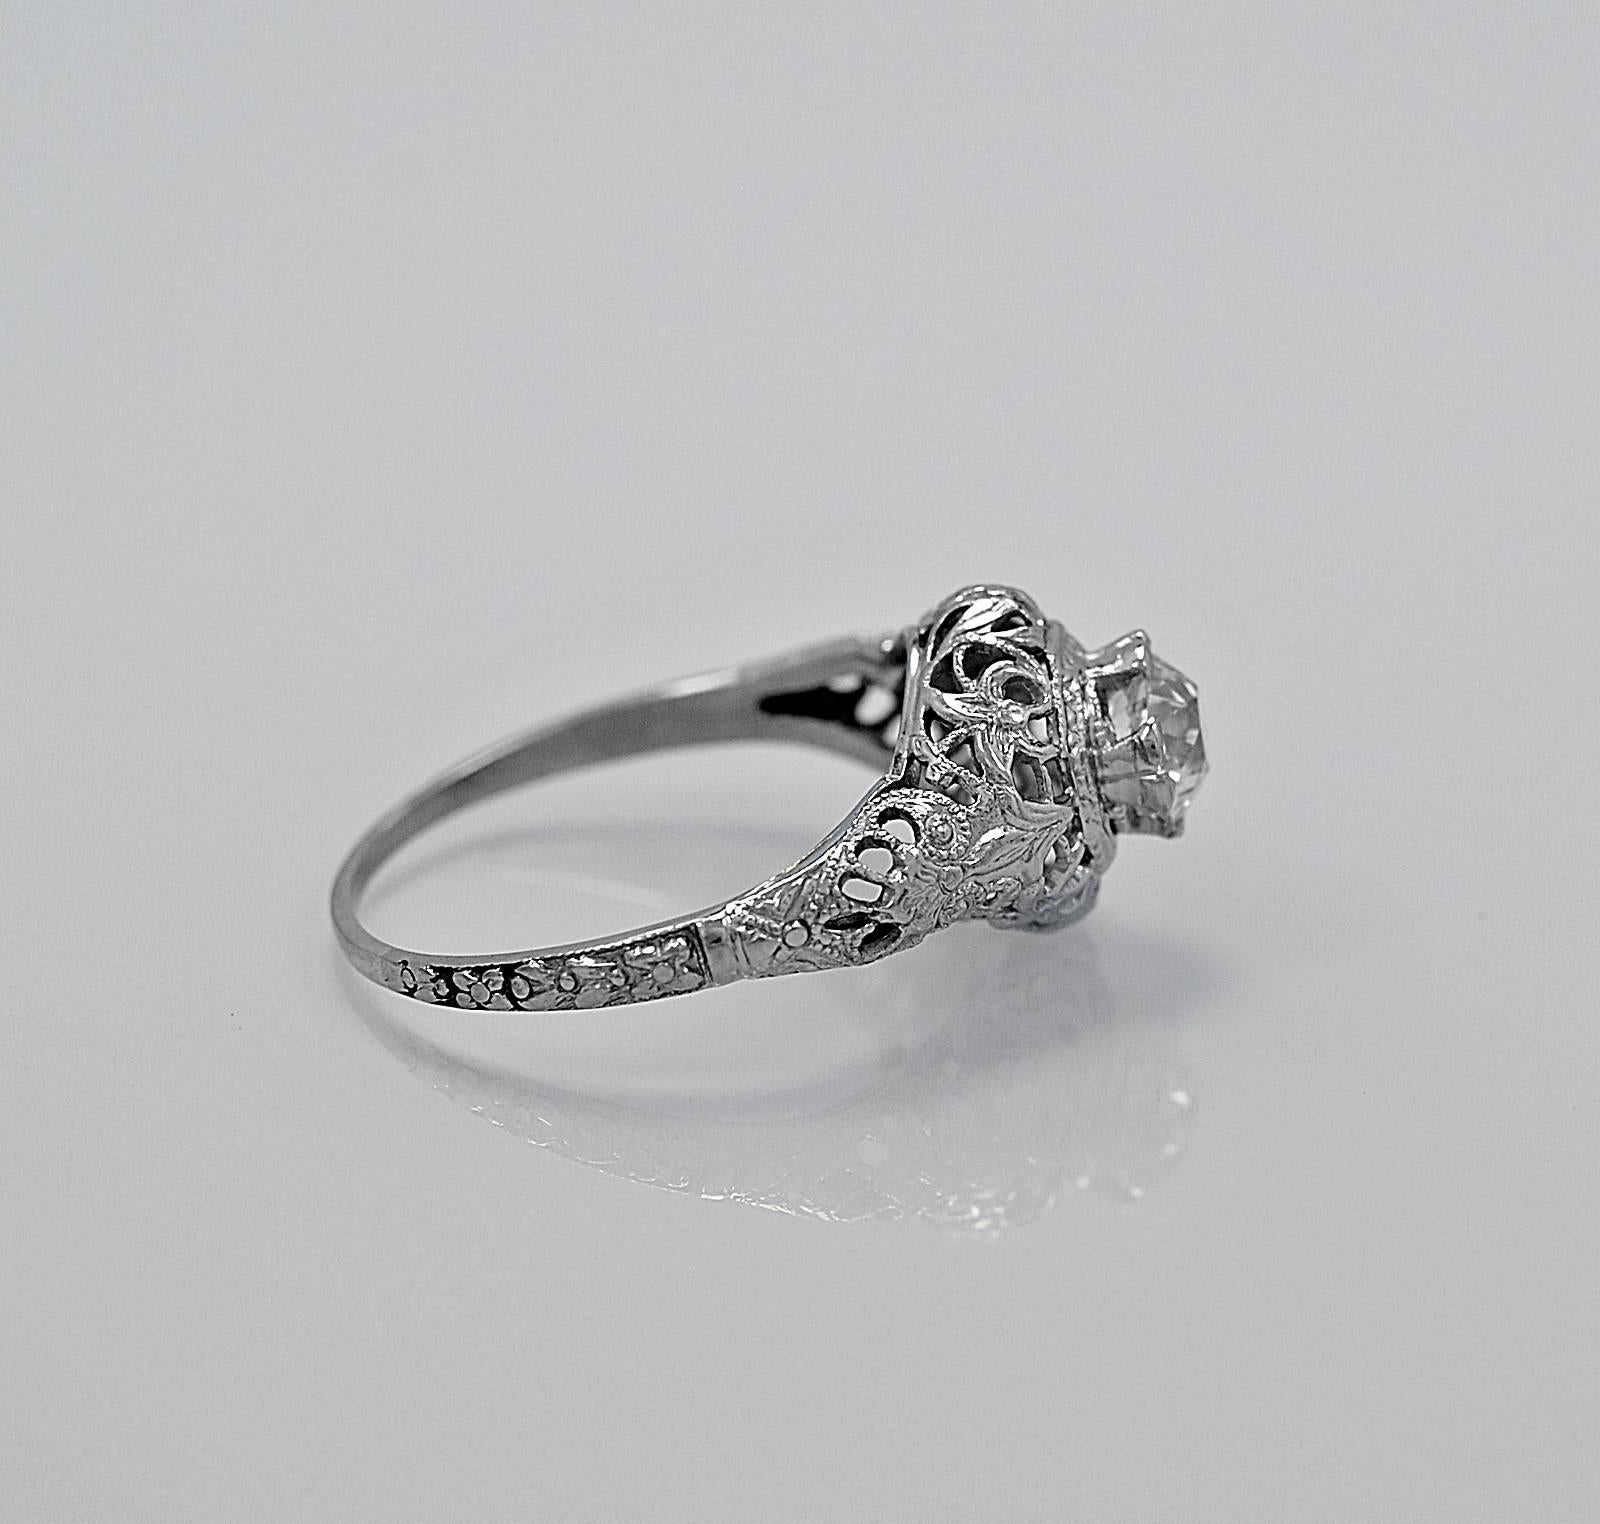 A very decorative antique engagement ring featuring a .60ct. apx. European cut diamond with SI1 clarity and J color. This timeless diamond ring is crafted with crisp filigree and engraving. Unbelievable!

Primary Stone(s): Diamond - Conflict